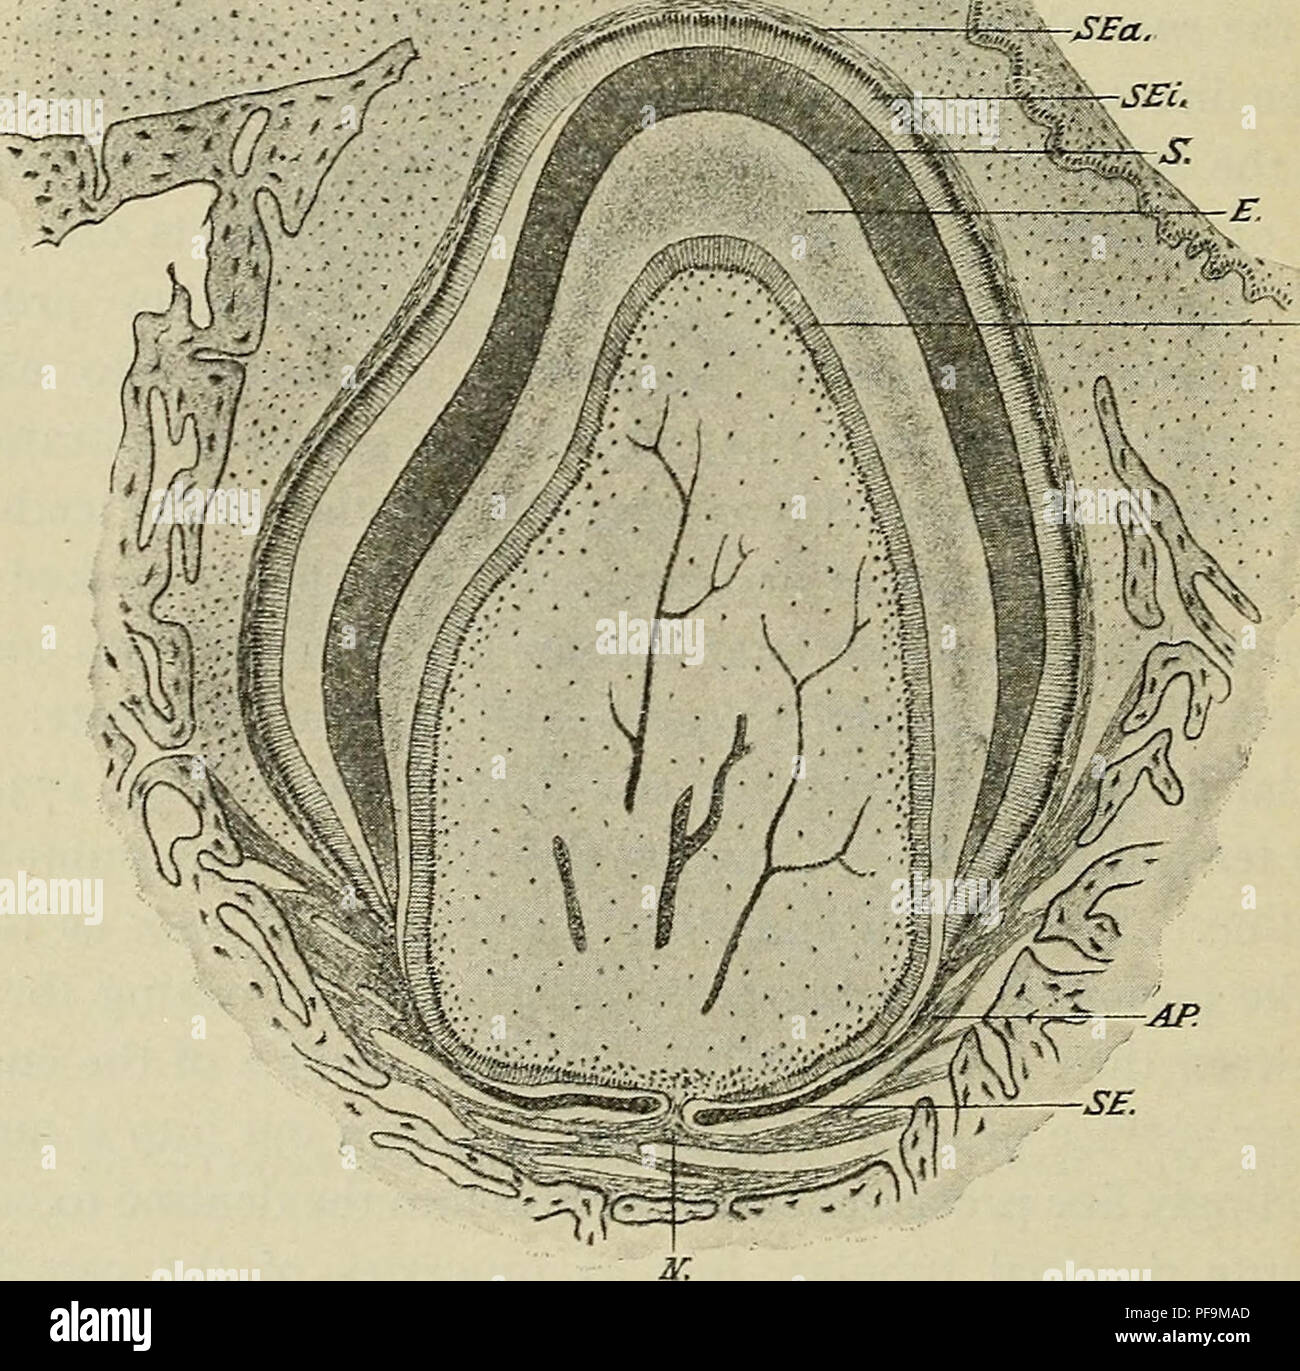 The development of the human body a manual of human embryology Embryology